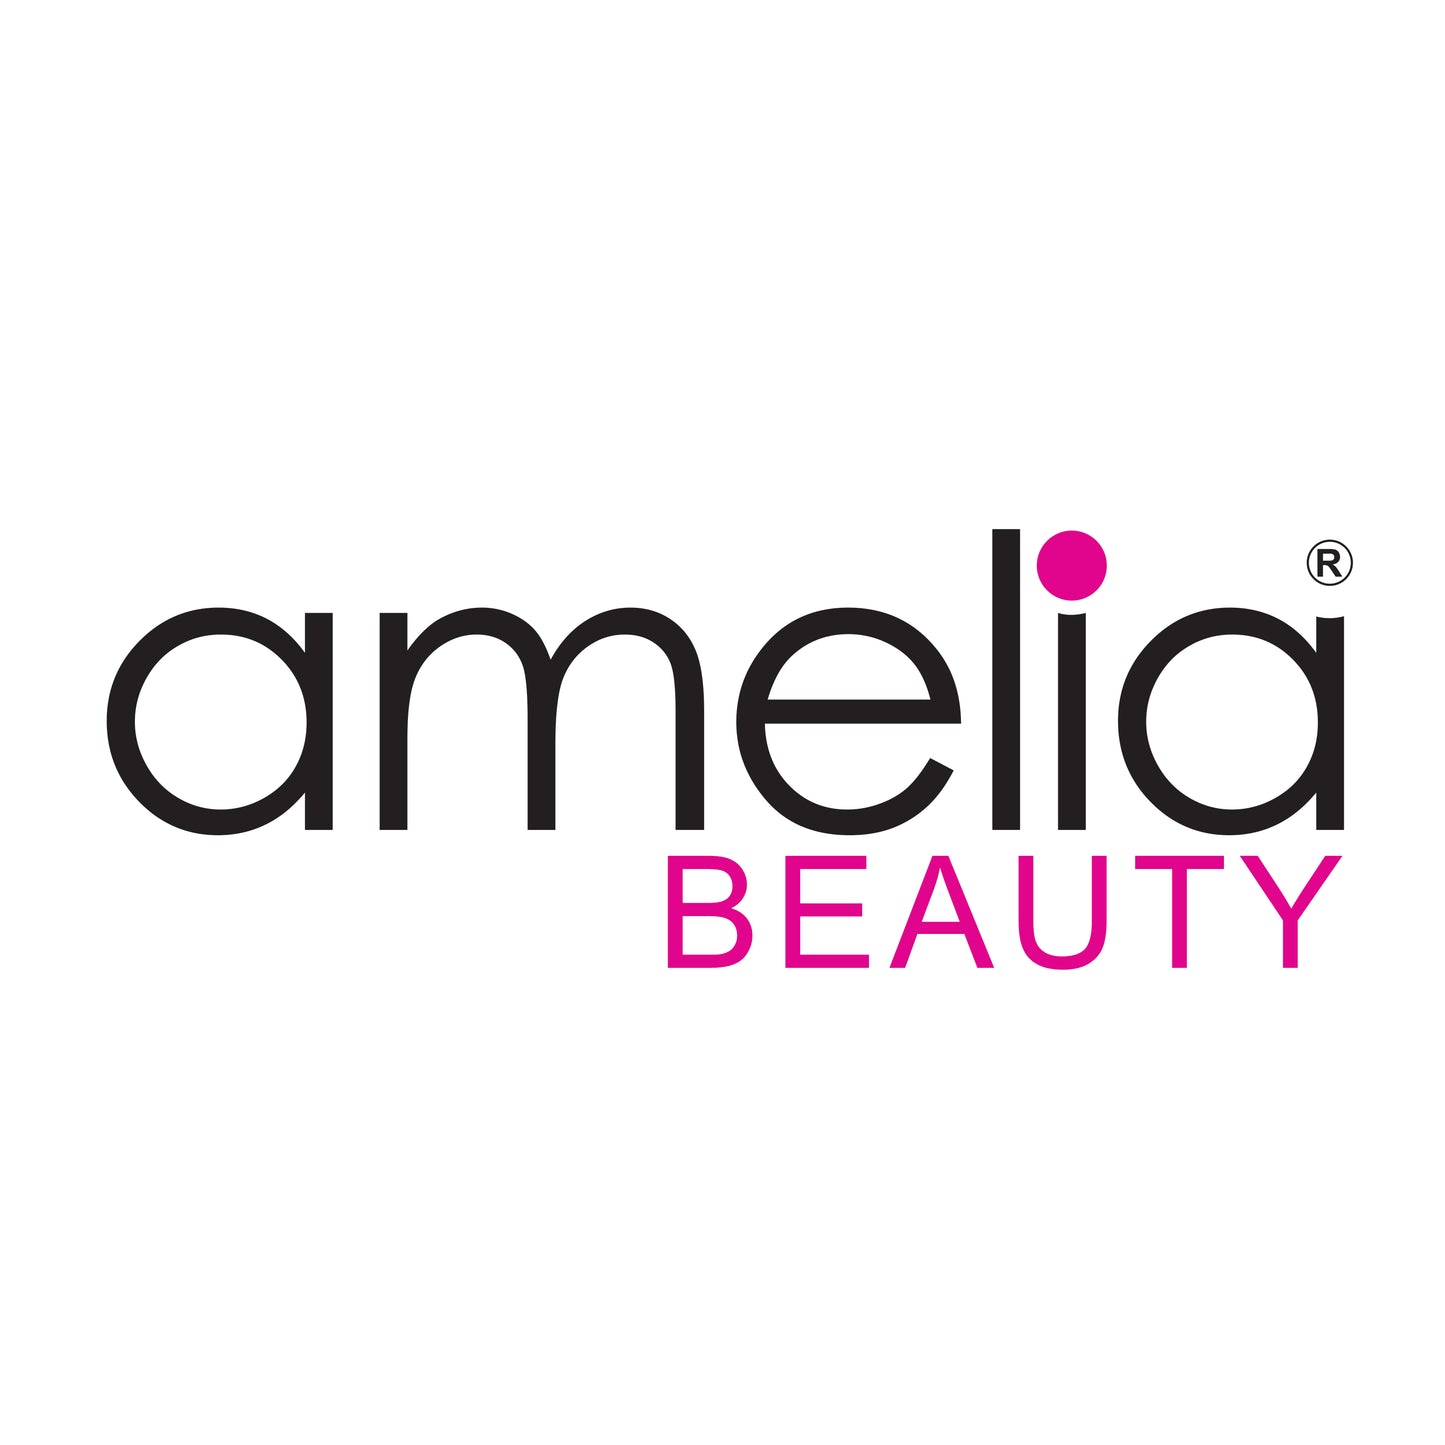 Amelia Beauty Products 8 Medium Elastic Hair Coils, 2.0in Diameter Thick Spiral Hair Ties, Gentle on Hair, Strong Hold and Minimizes Dents and Creases, Black, Brown and White Mix